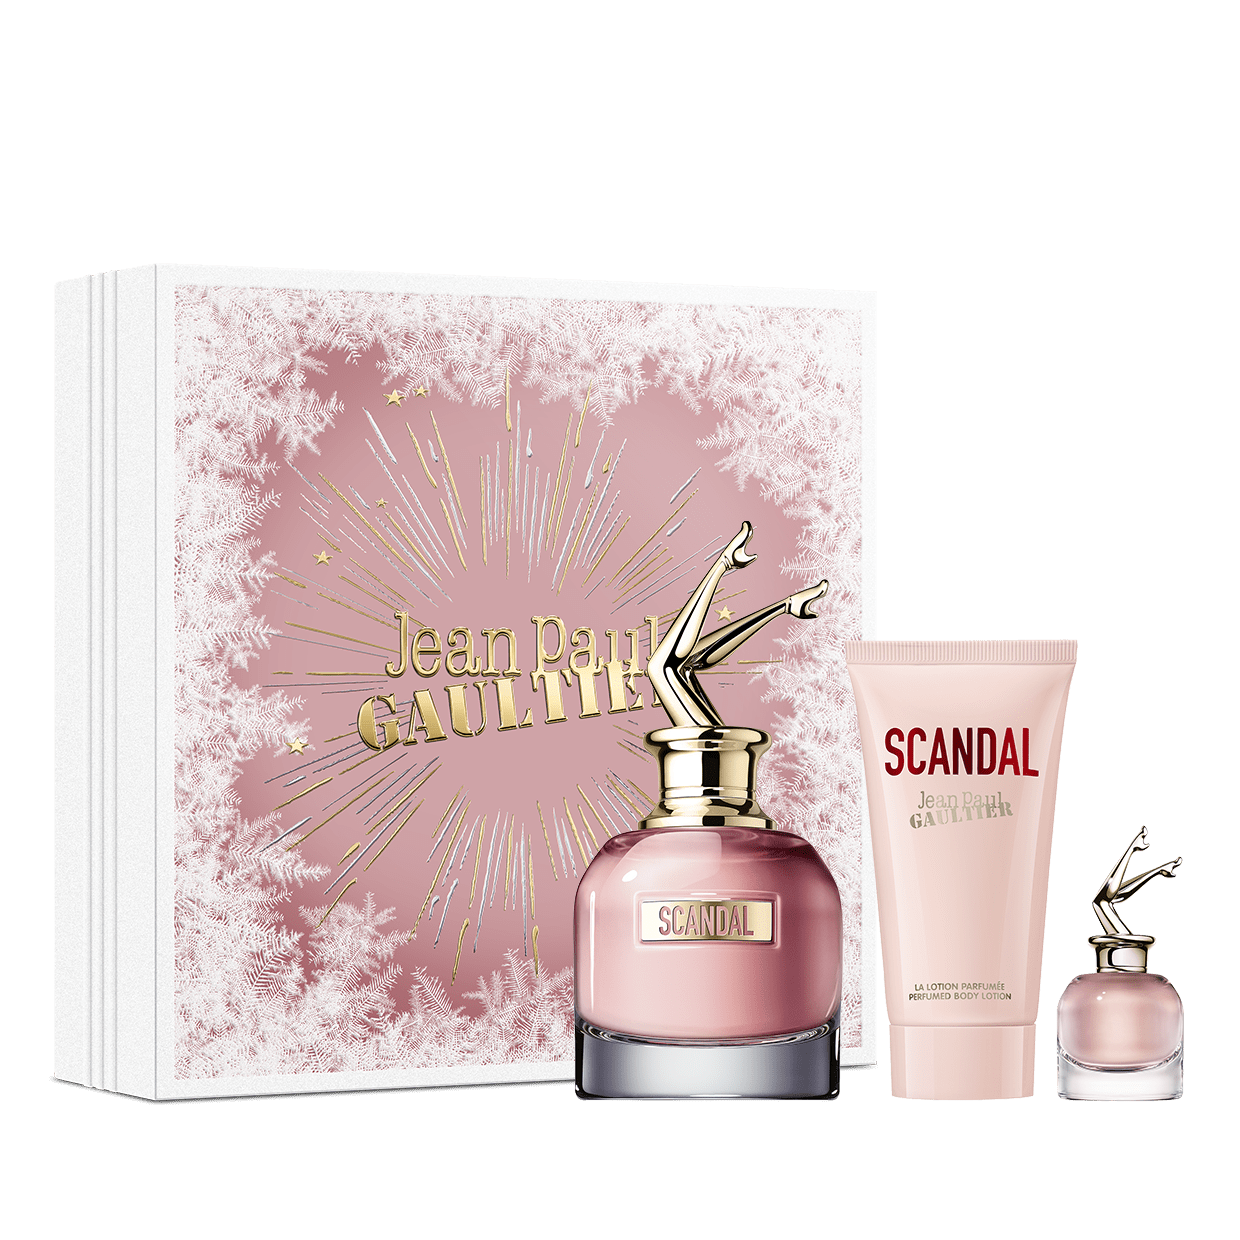 Scandal 50 ml, Body lotion 75 ml and Miniature 6 ml